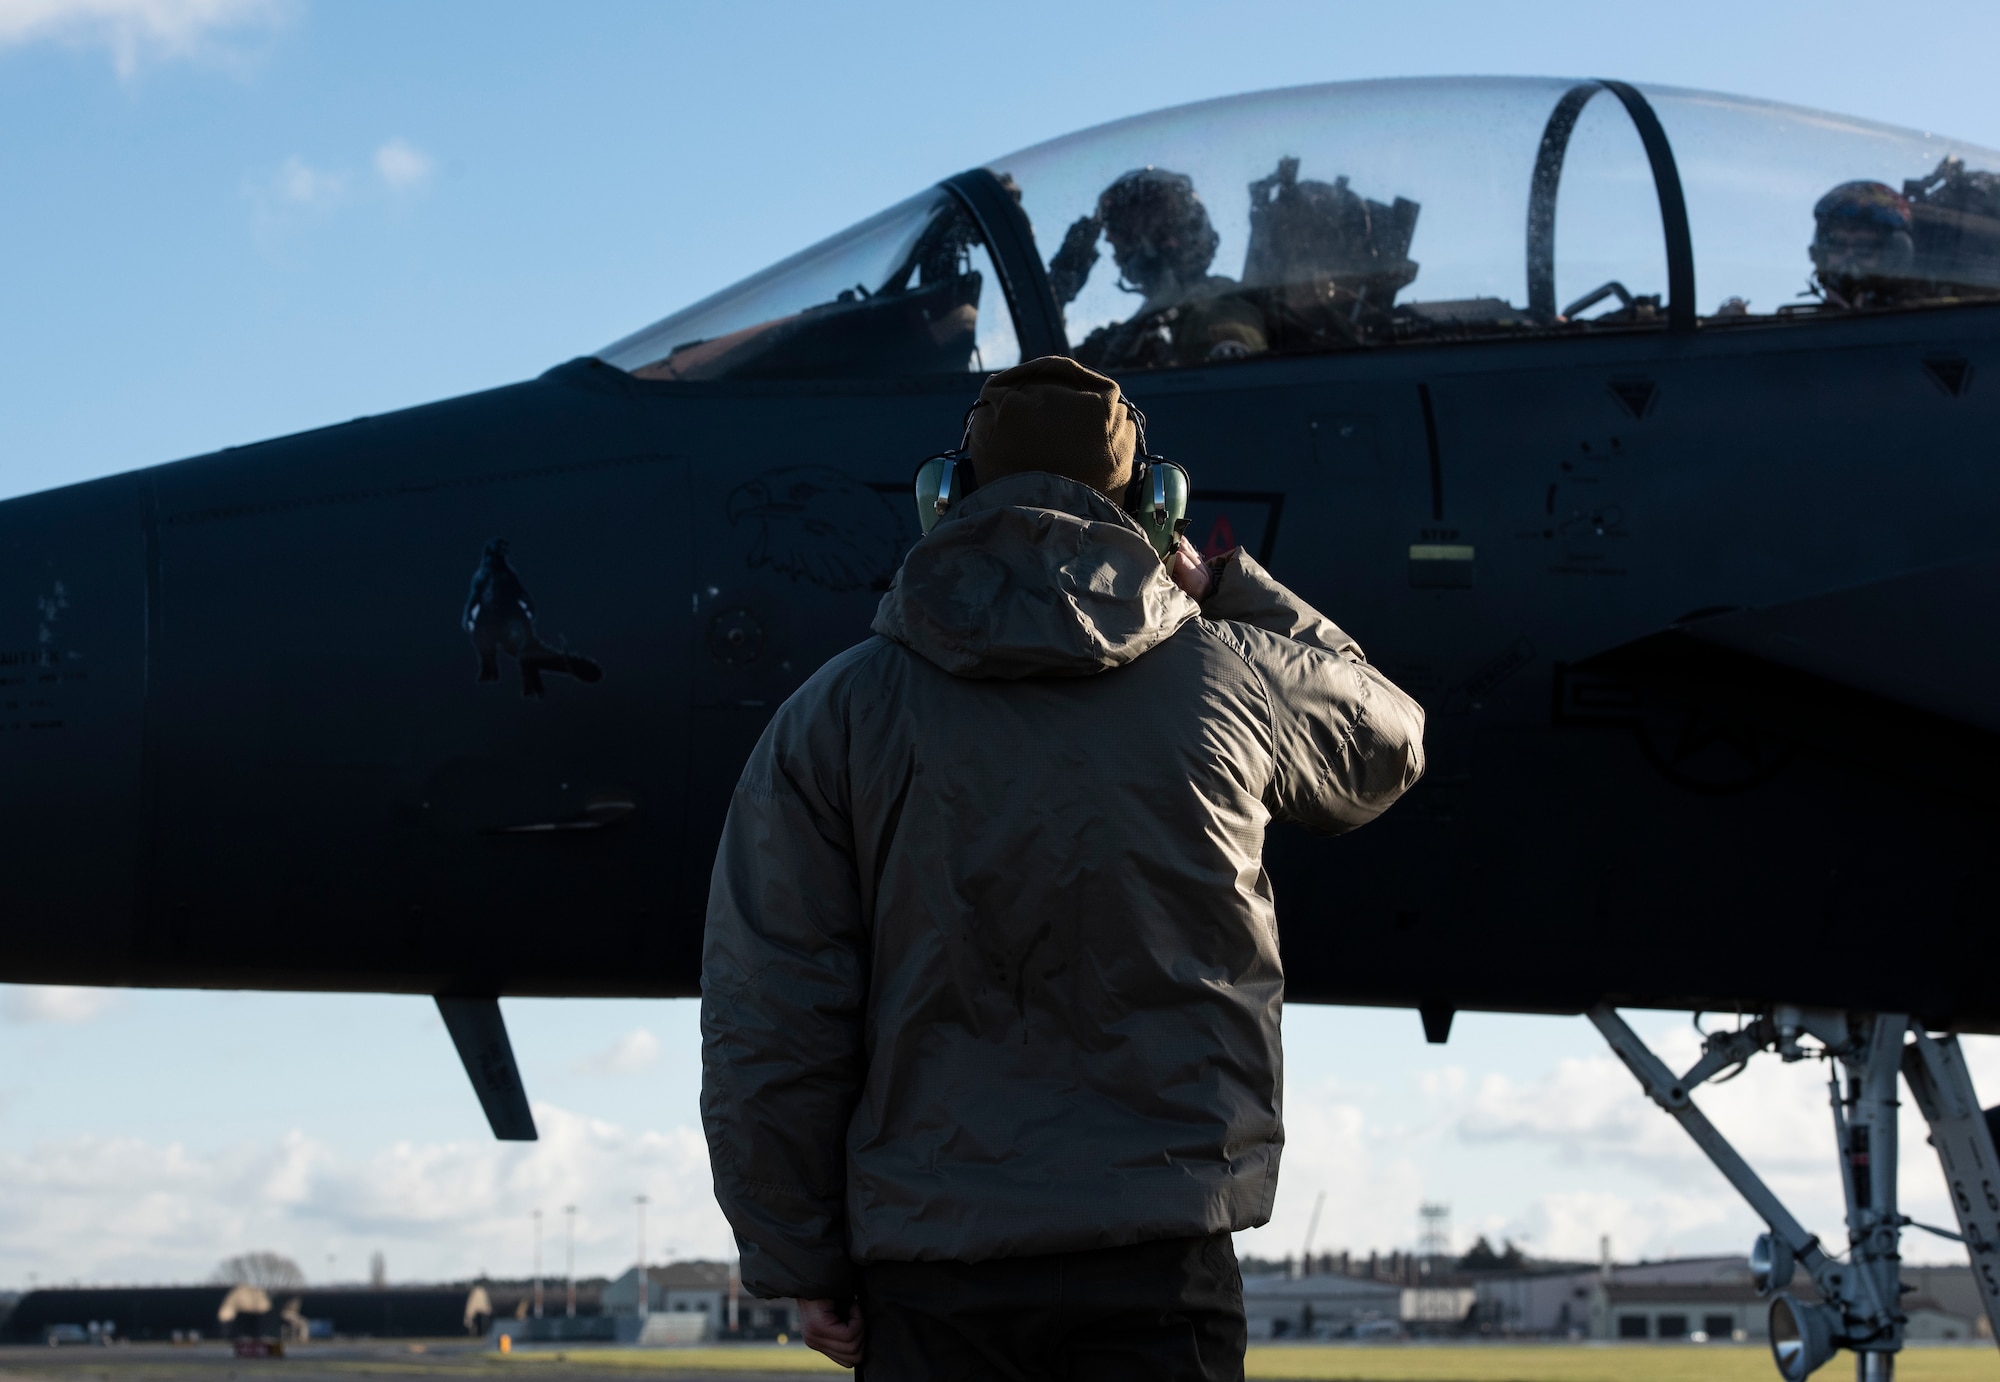 A U.S. Air Force Airman assigned to the 48th Aircraft Maintenance Squadron salutes aircrew as they taxi onto the flightline during Agile Combat Employment training at Royal Air Force Lakenheath, England, Jan. 12, 2021. Exercising elements of ACE enables U.S. Air Forces in Europe to operate from locations with varying levels of capacity and support, ensuring Airmen and aircrews are postured to deliver lethal combat power across the spectrum of military operations. (U.S. Air Force photo by Airman 1st Class Jessi Monte)